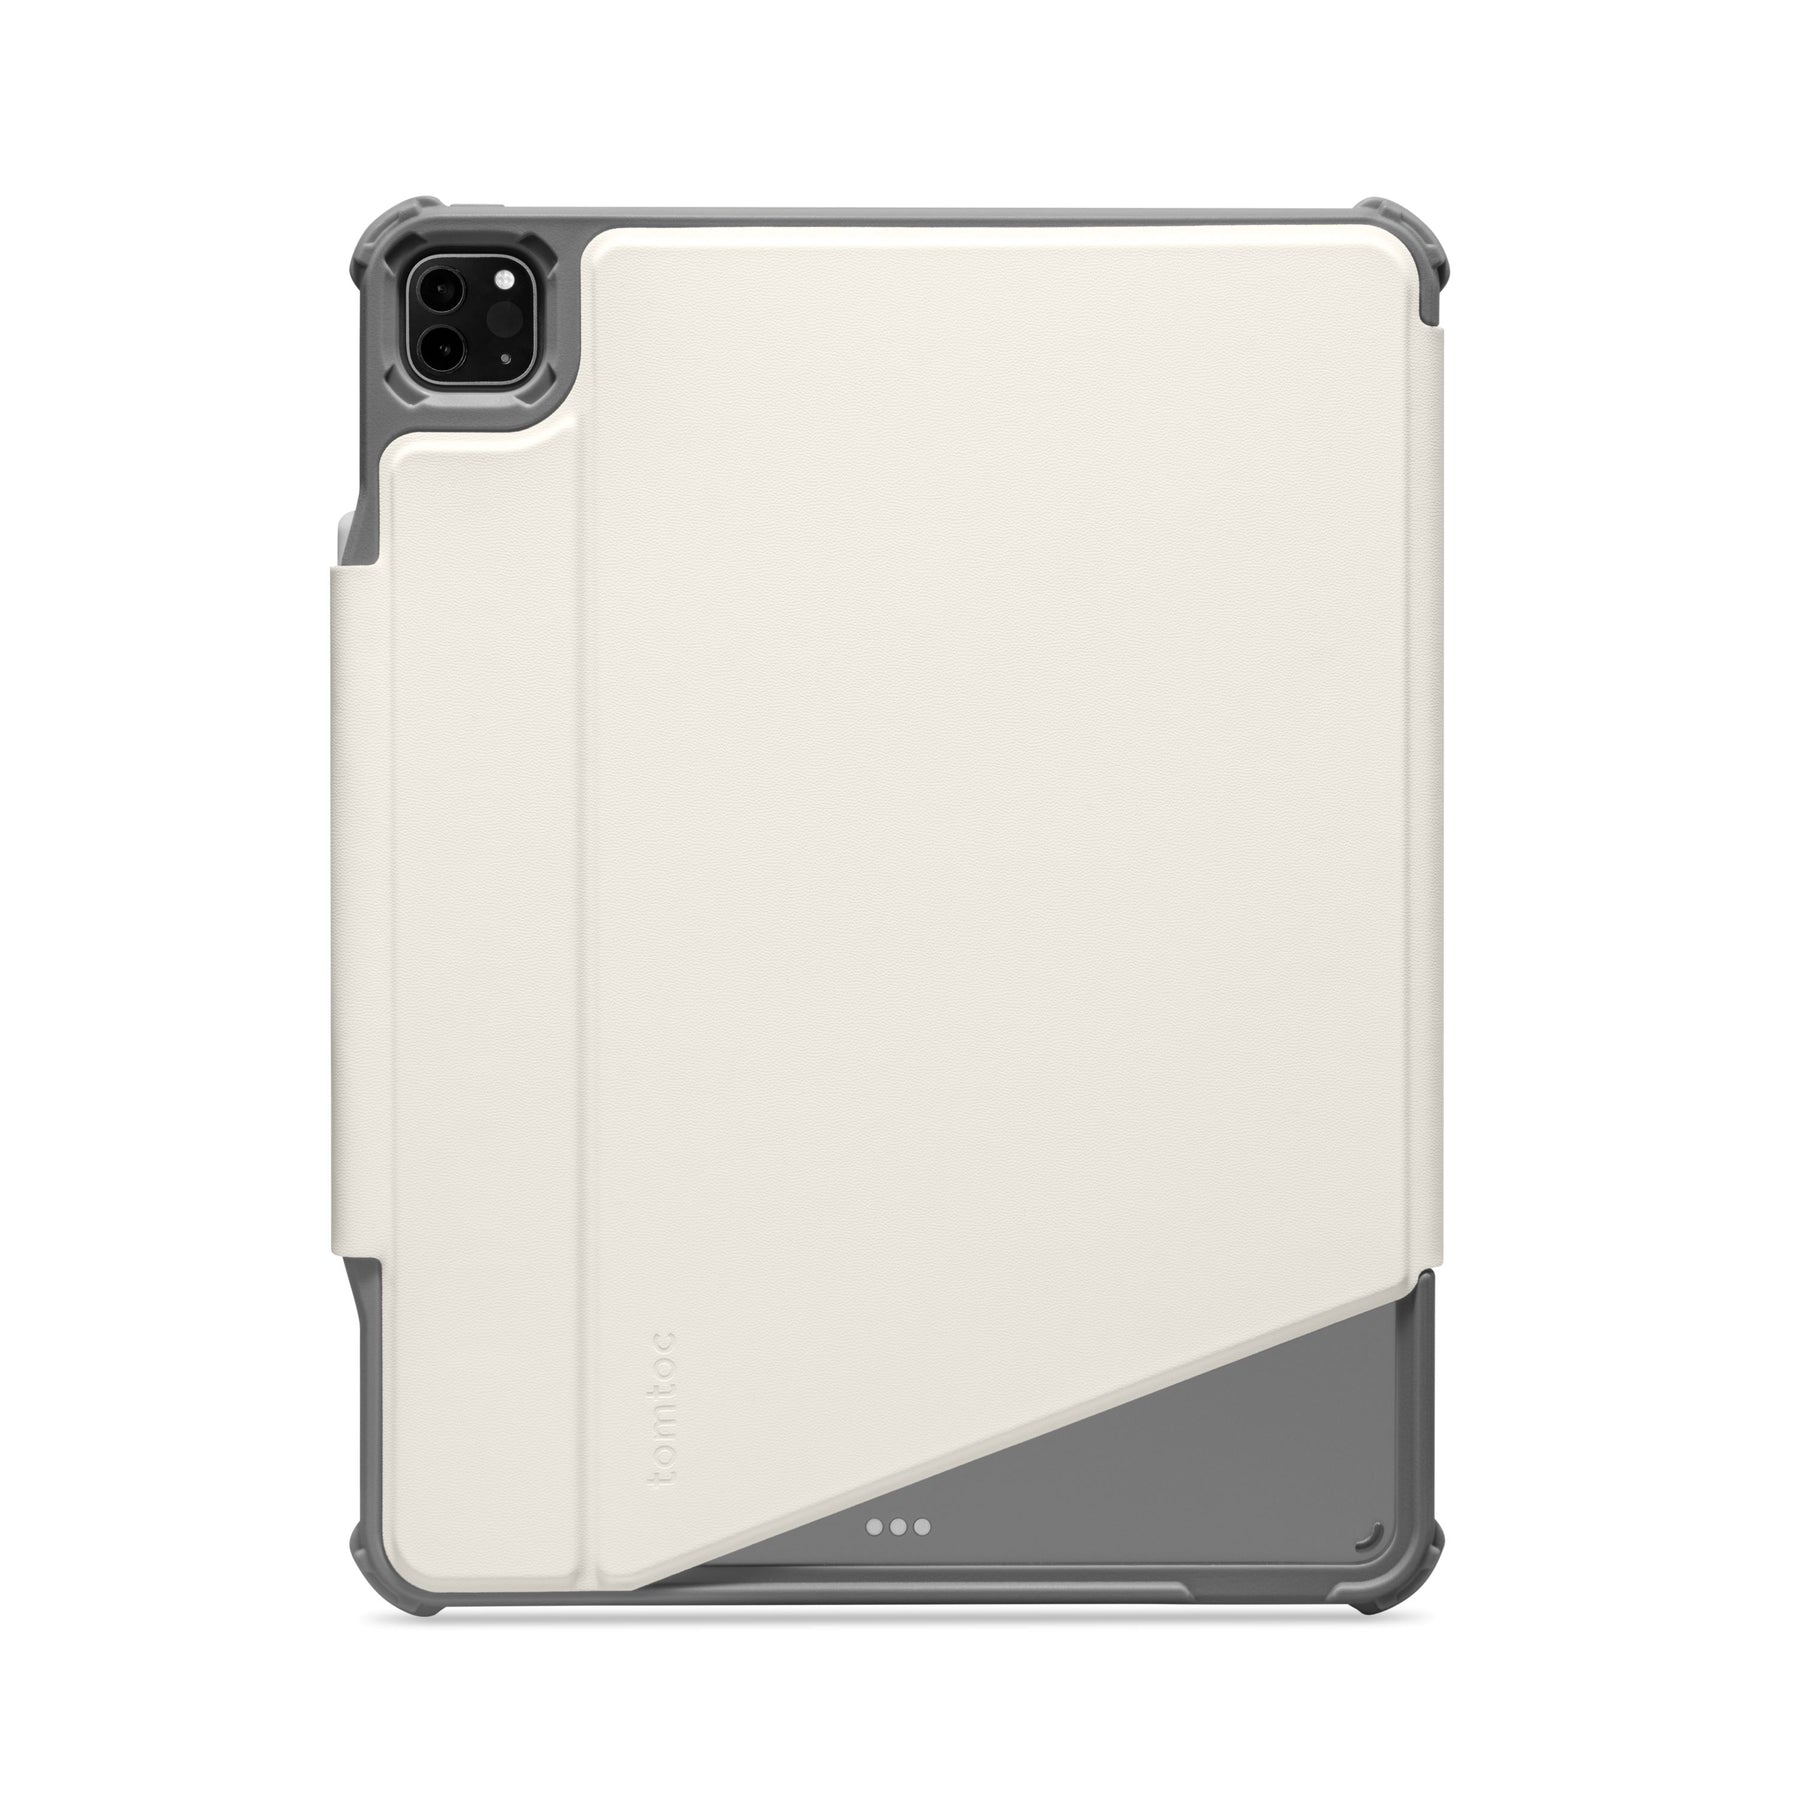 Inspire-B53 iPad 4-mode Hybrid Case Ivory White 11-inch [up to 5th Gen Air / 4th Gen Pro]